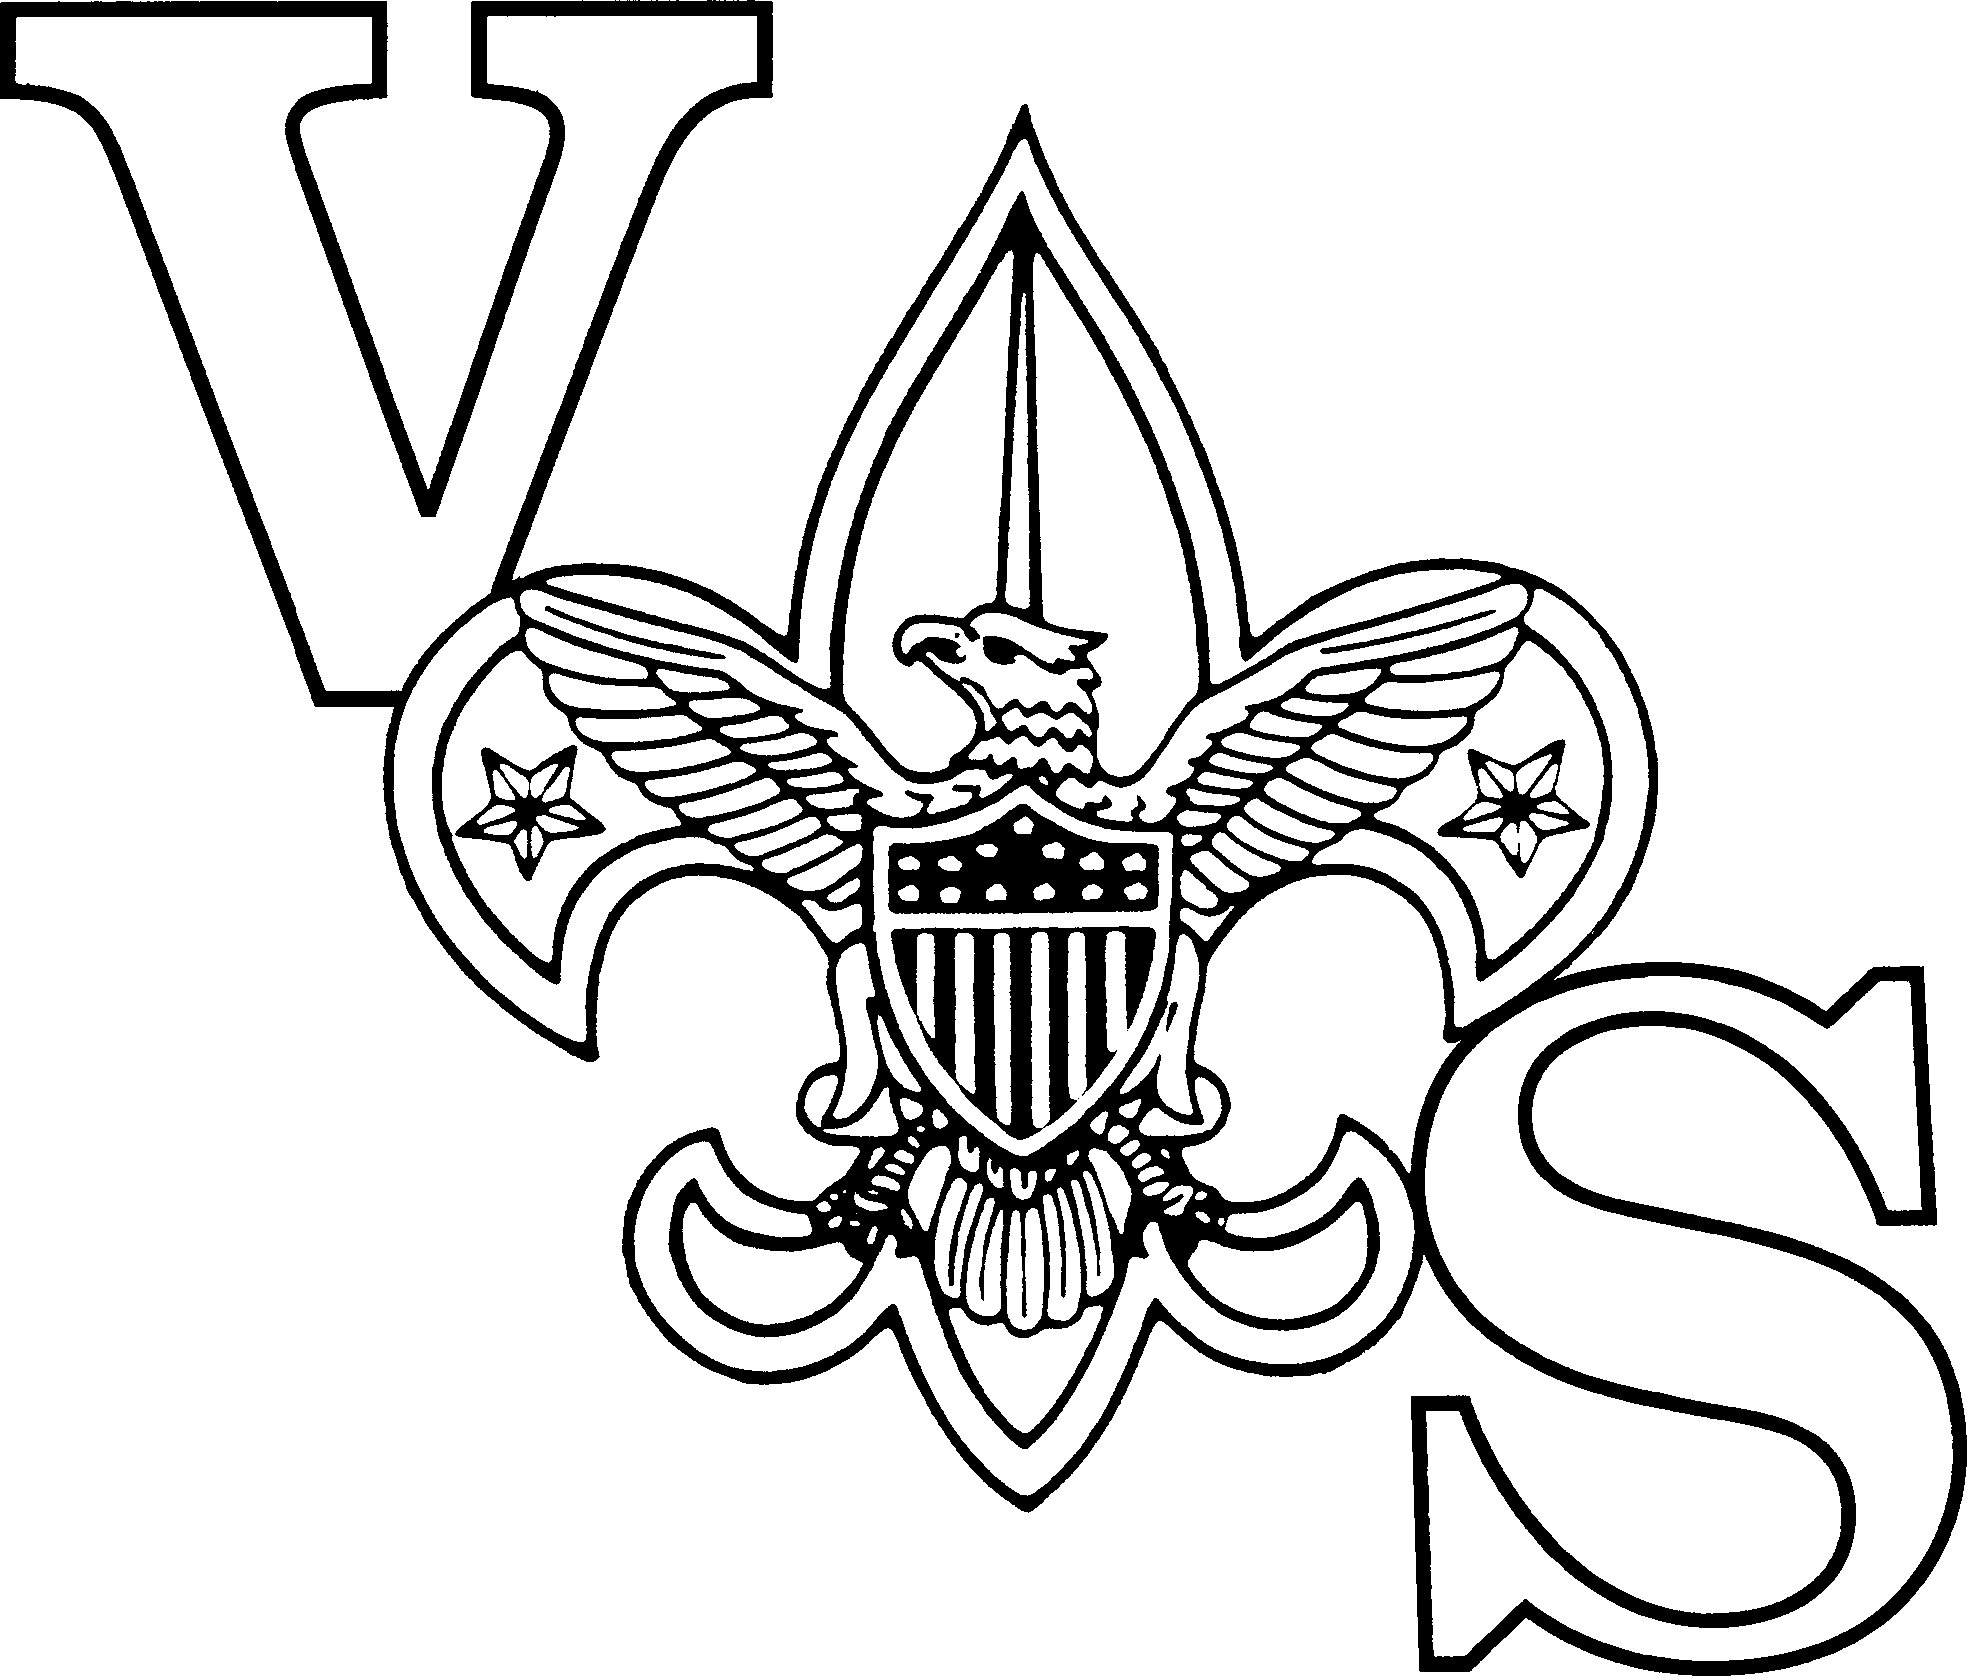 USSSP - Clipart & Library